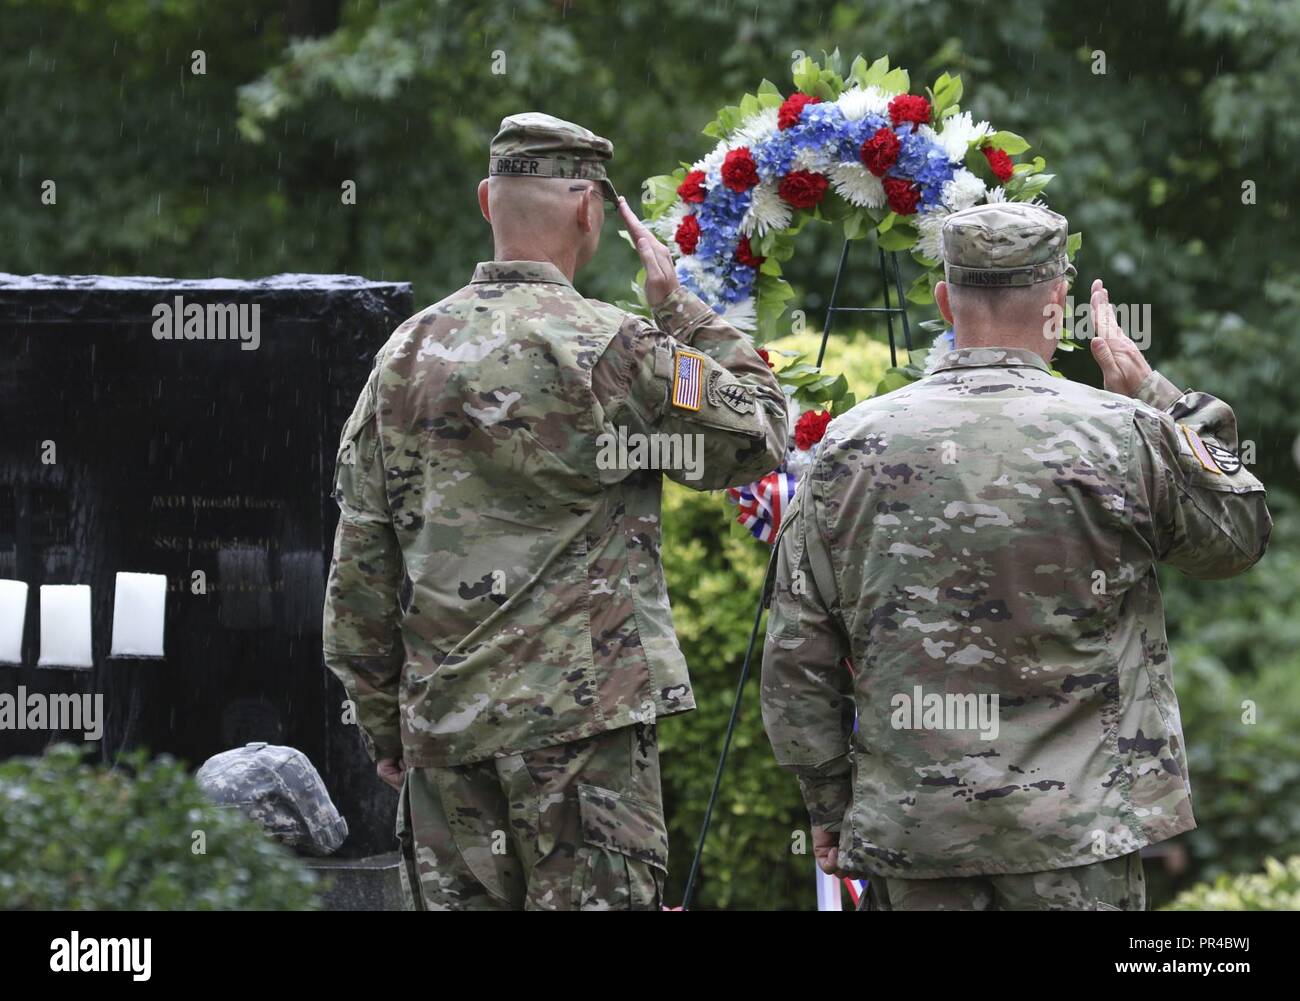 Col. Michael M. Greer (left), and Brig. Gen. John F. Hussey place a wreath on the memorial during the 9/11 Day of Remembrance ceremony at Fort Totten, New York on September 9, 2018. Wreath laying ceremonies are a tradition performed to honor fallen Soldiers. (Army Stock Photo